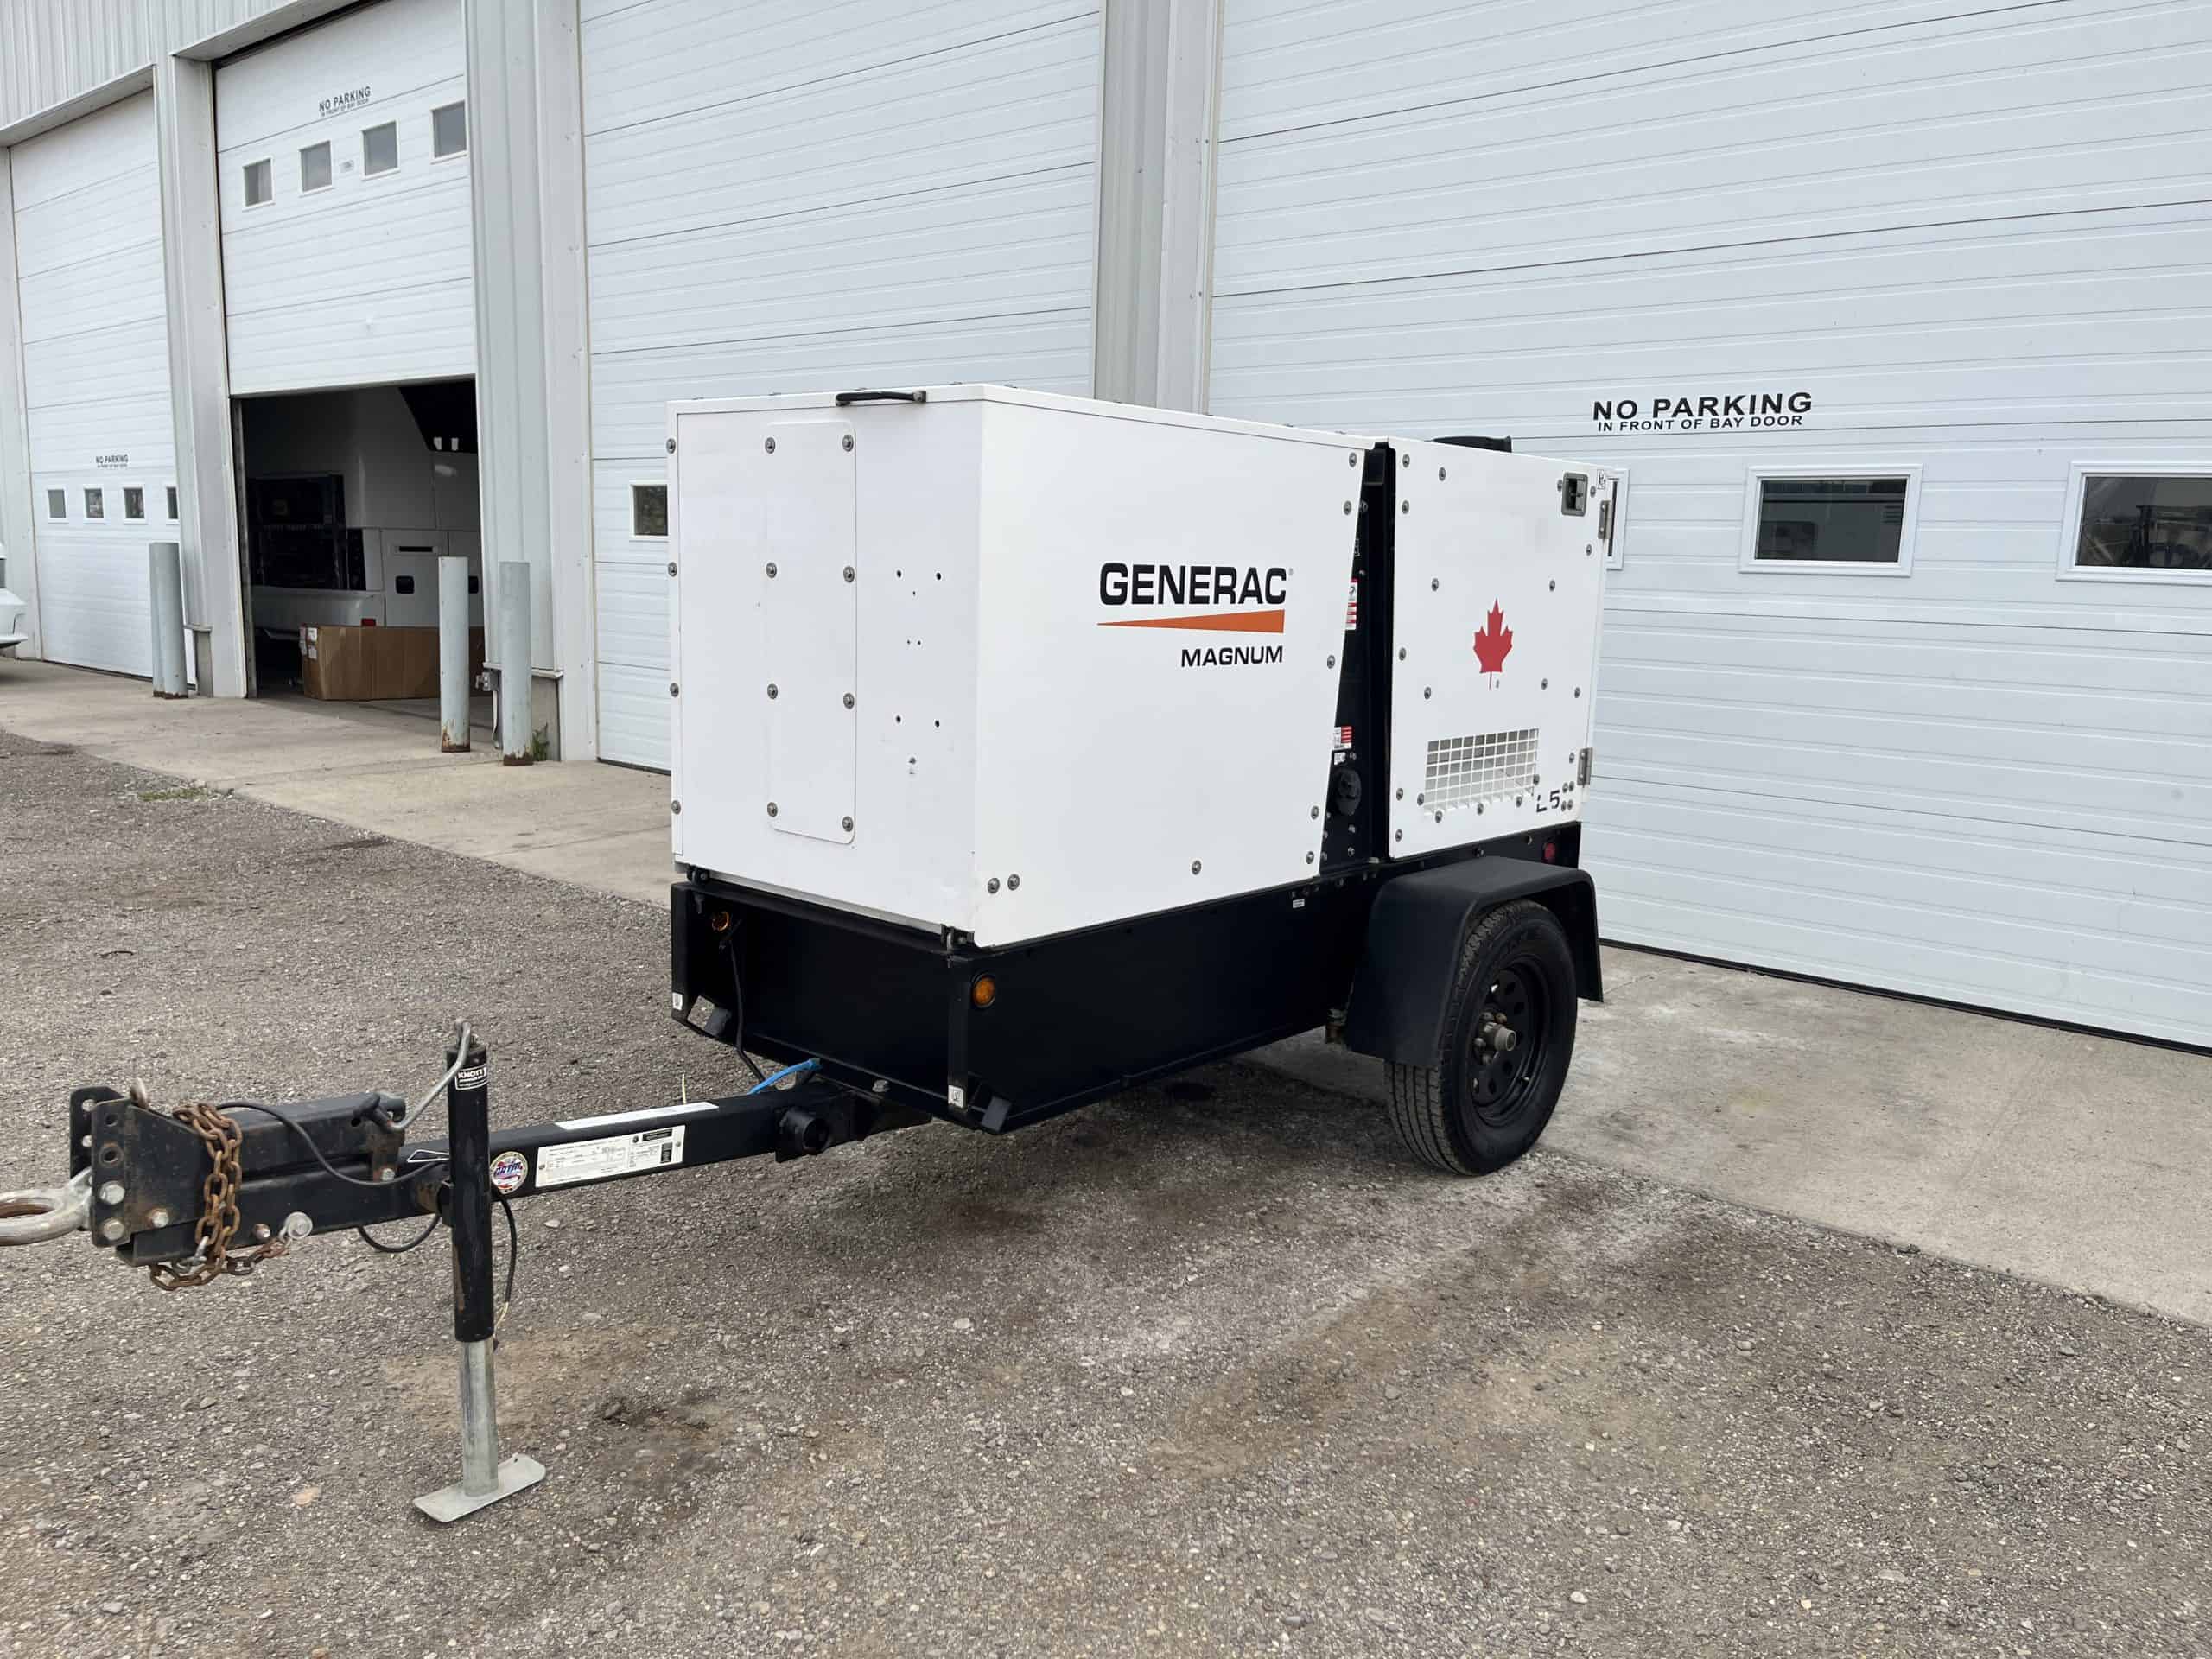 20 KW Generac Generator For Sale - MMG25 in Kelowna, Vancouver, Victoria and Fort St John BC